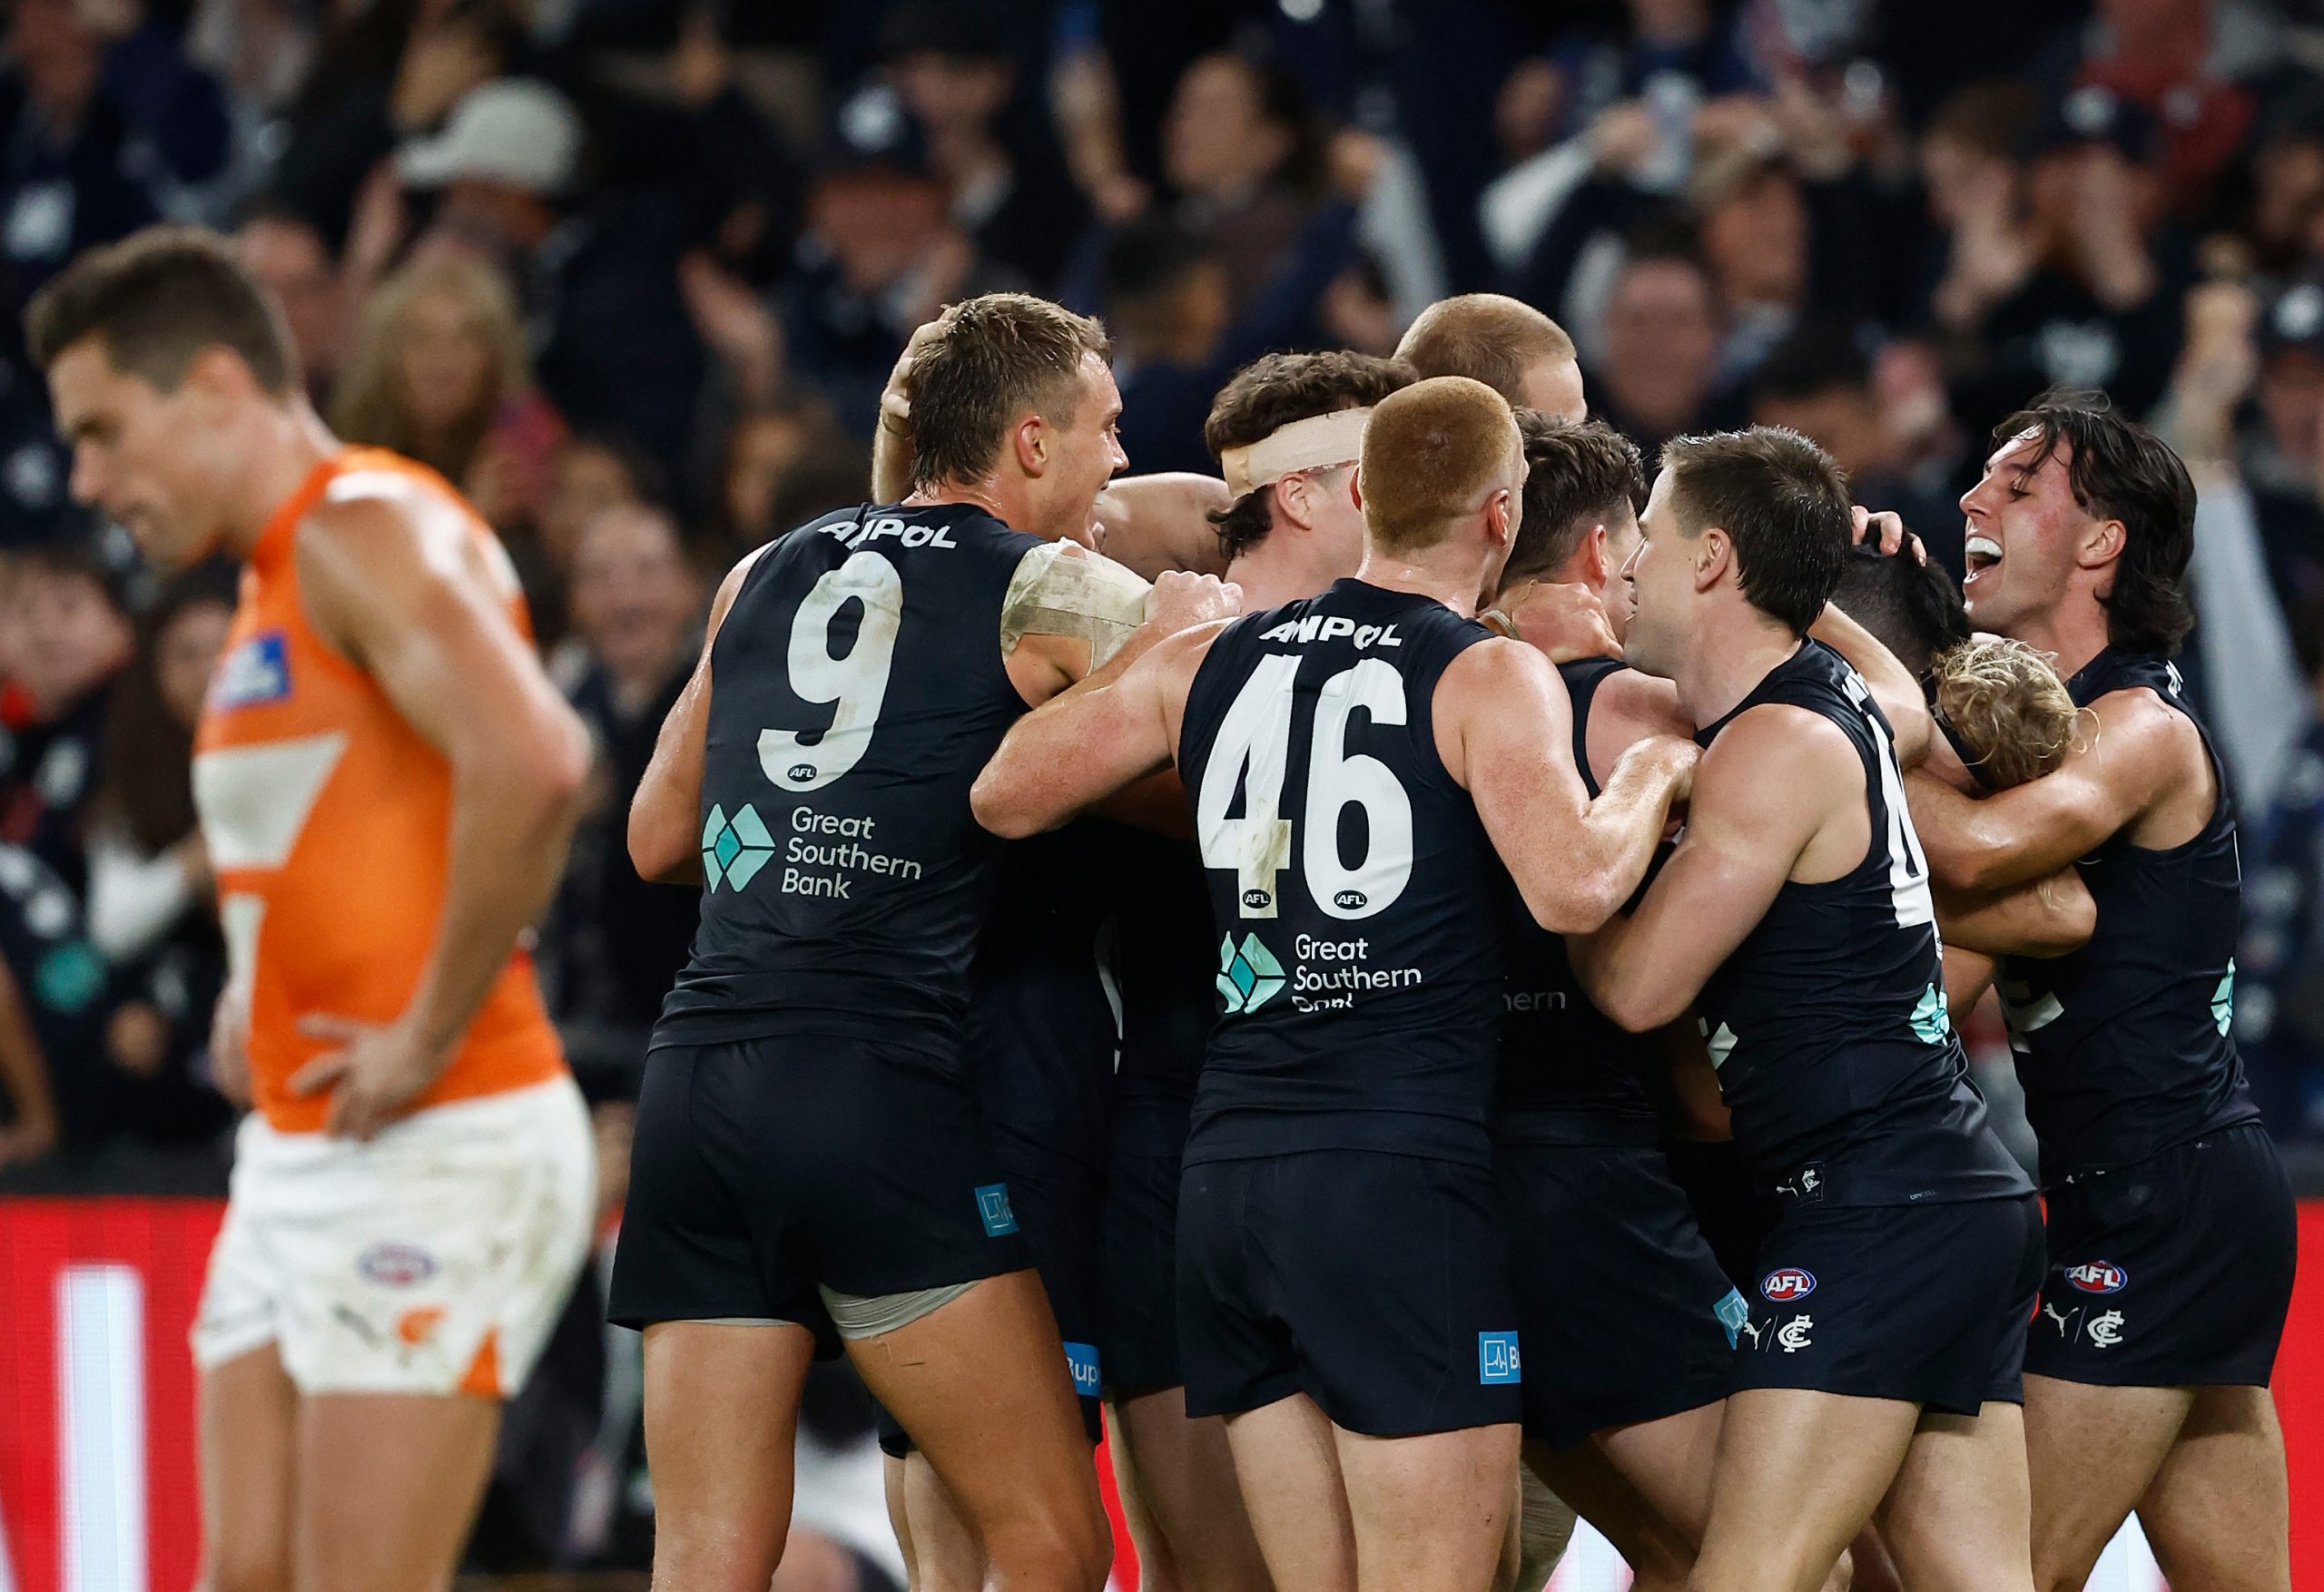 The Blues are 5-1 heading into round seven against Geelong.